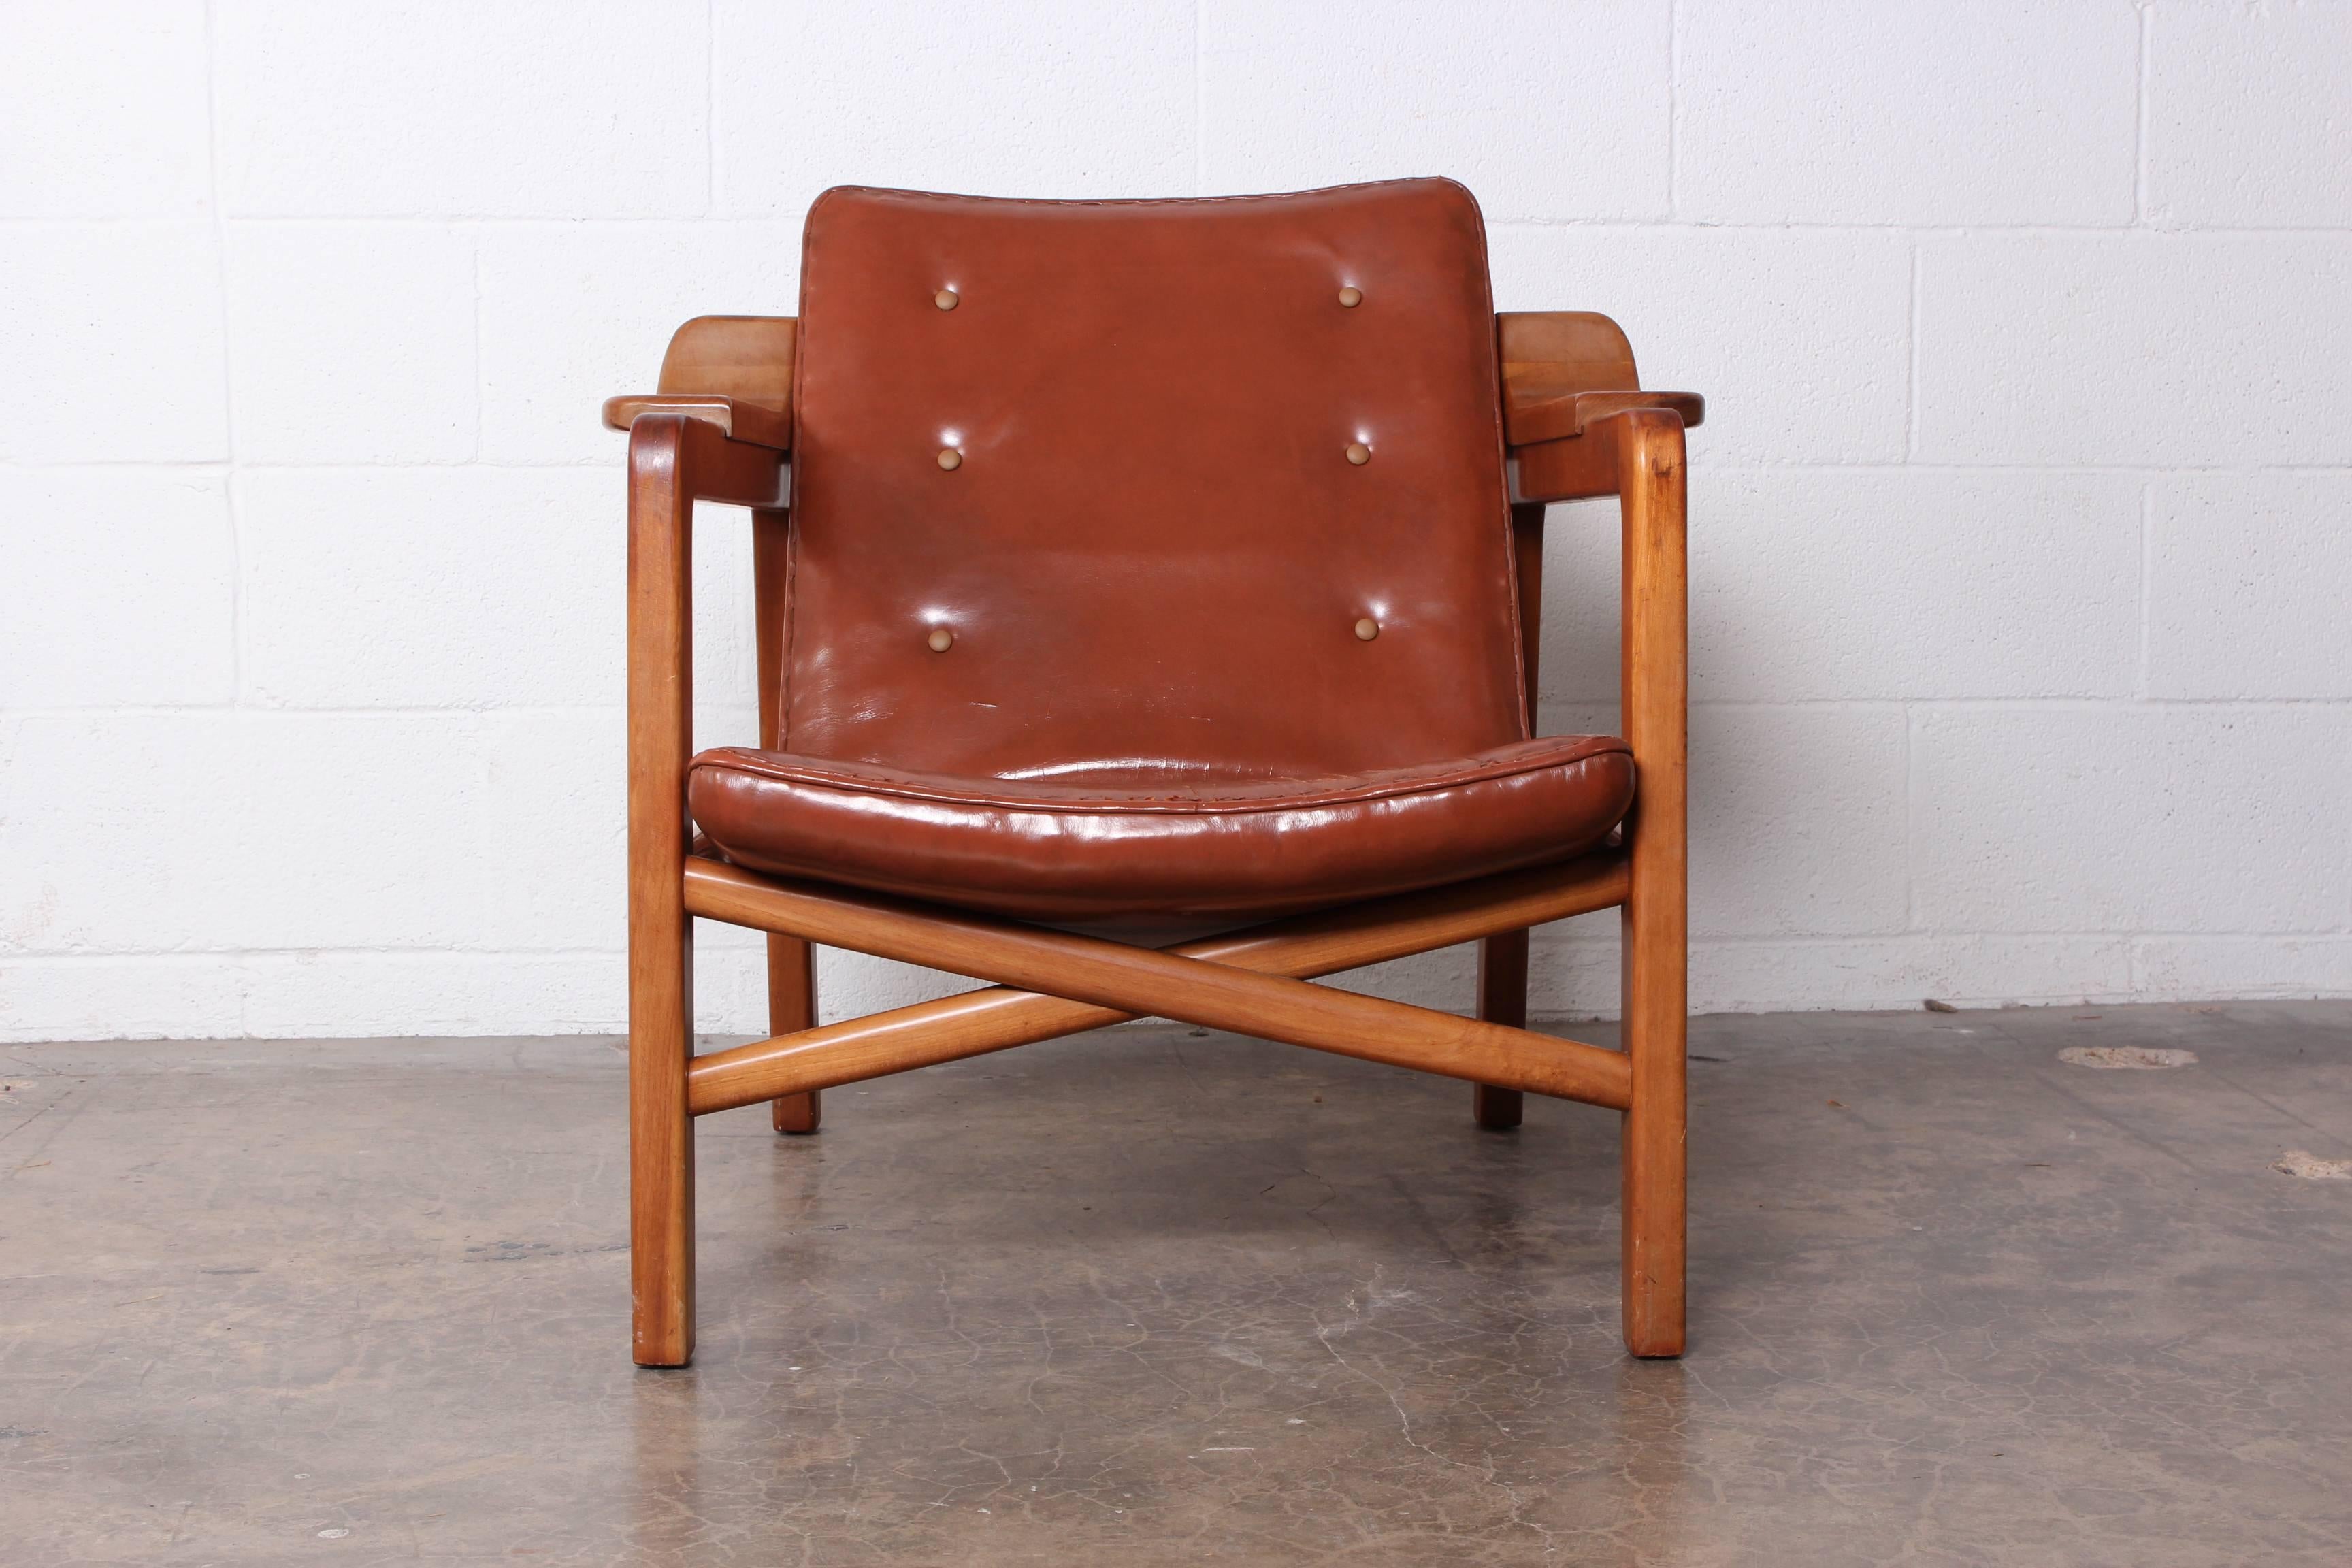 A teak 'Fireplace' lounge chair in it's original patinated leather. Designed by Tove & Edvard Kindt-Larsen.